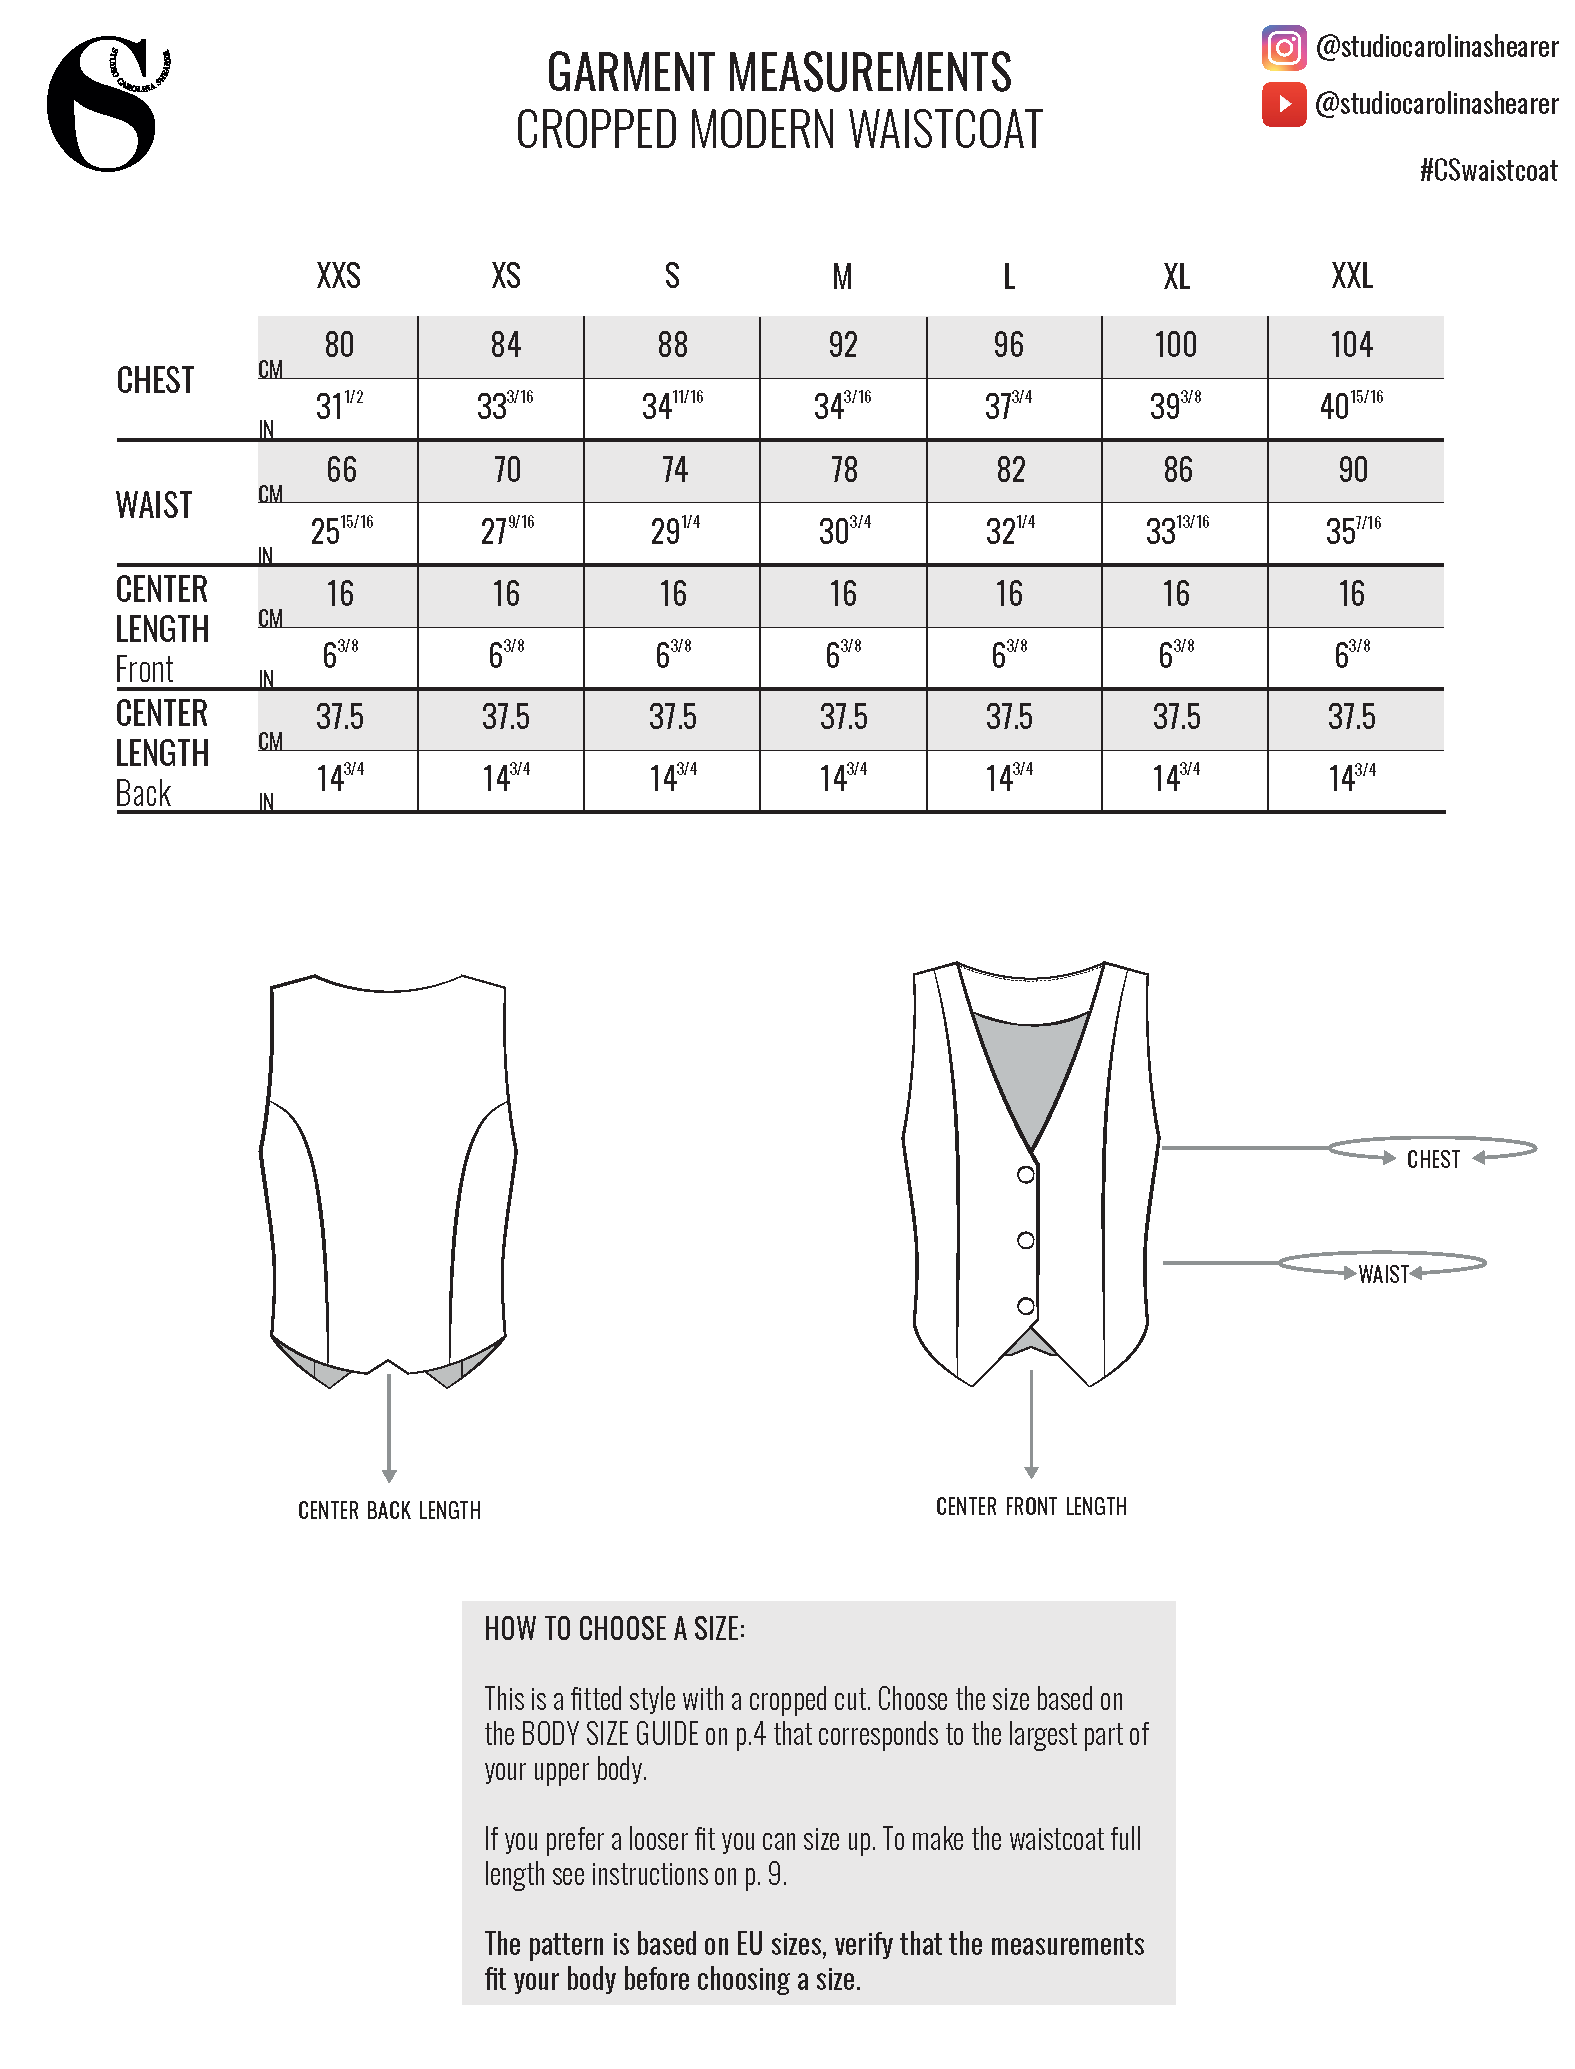 Garment measurements for the waistcoat in multiple sizes.